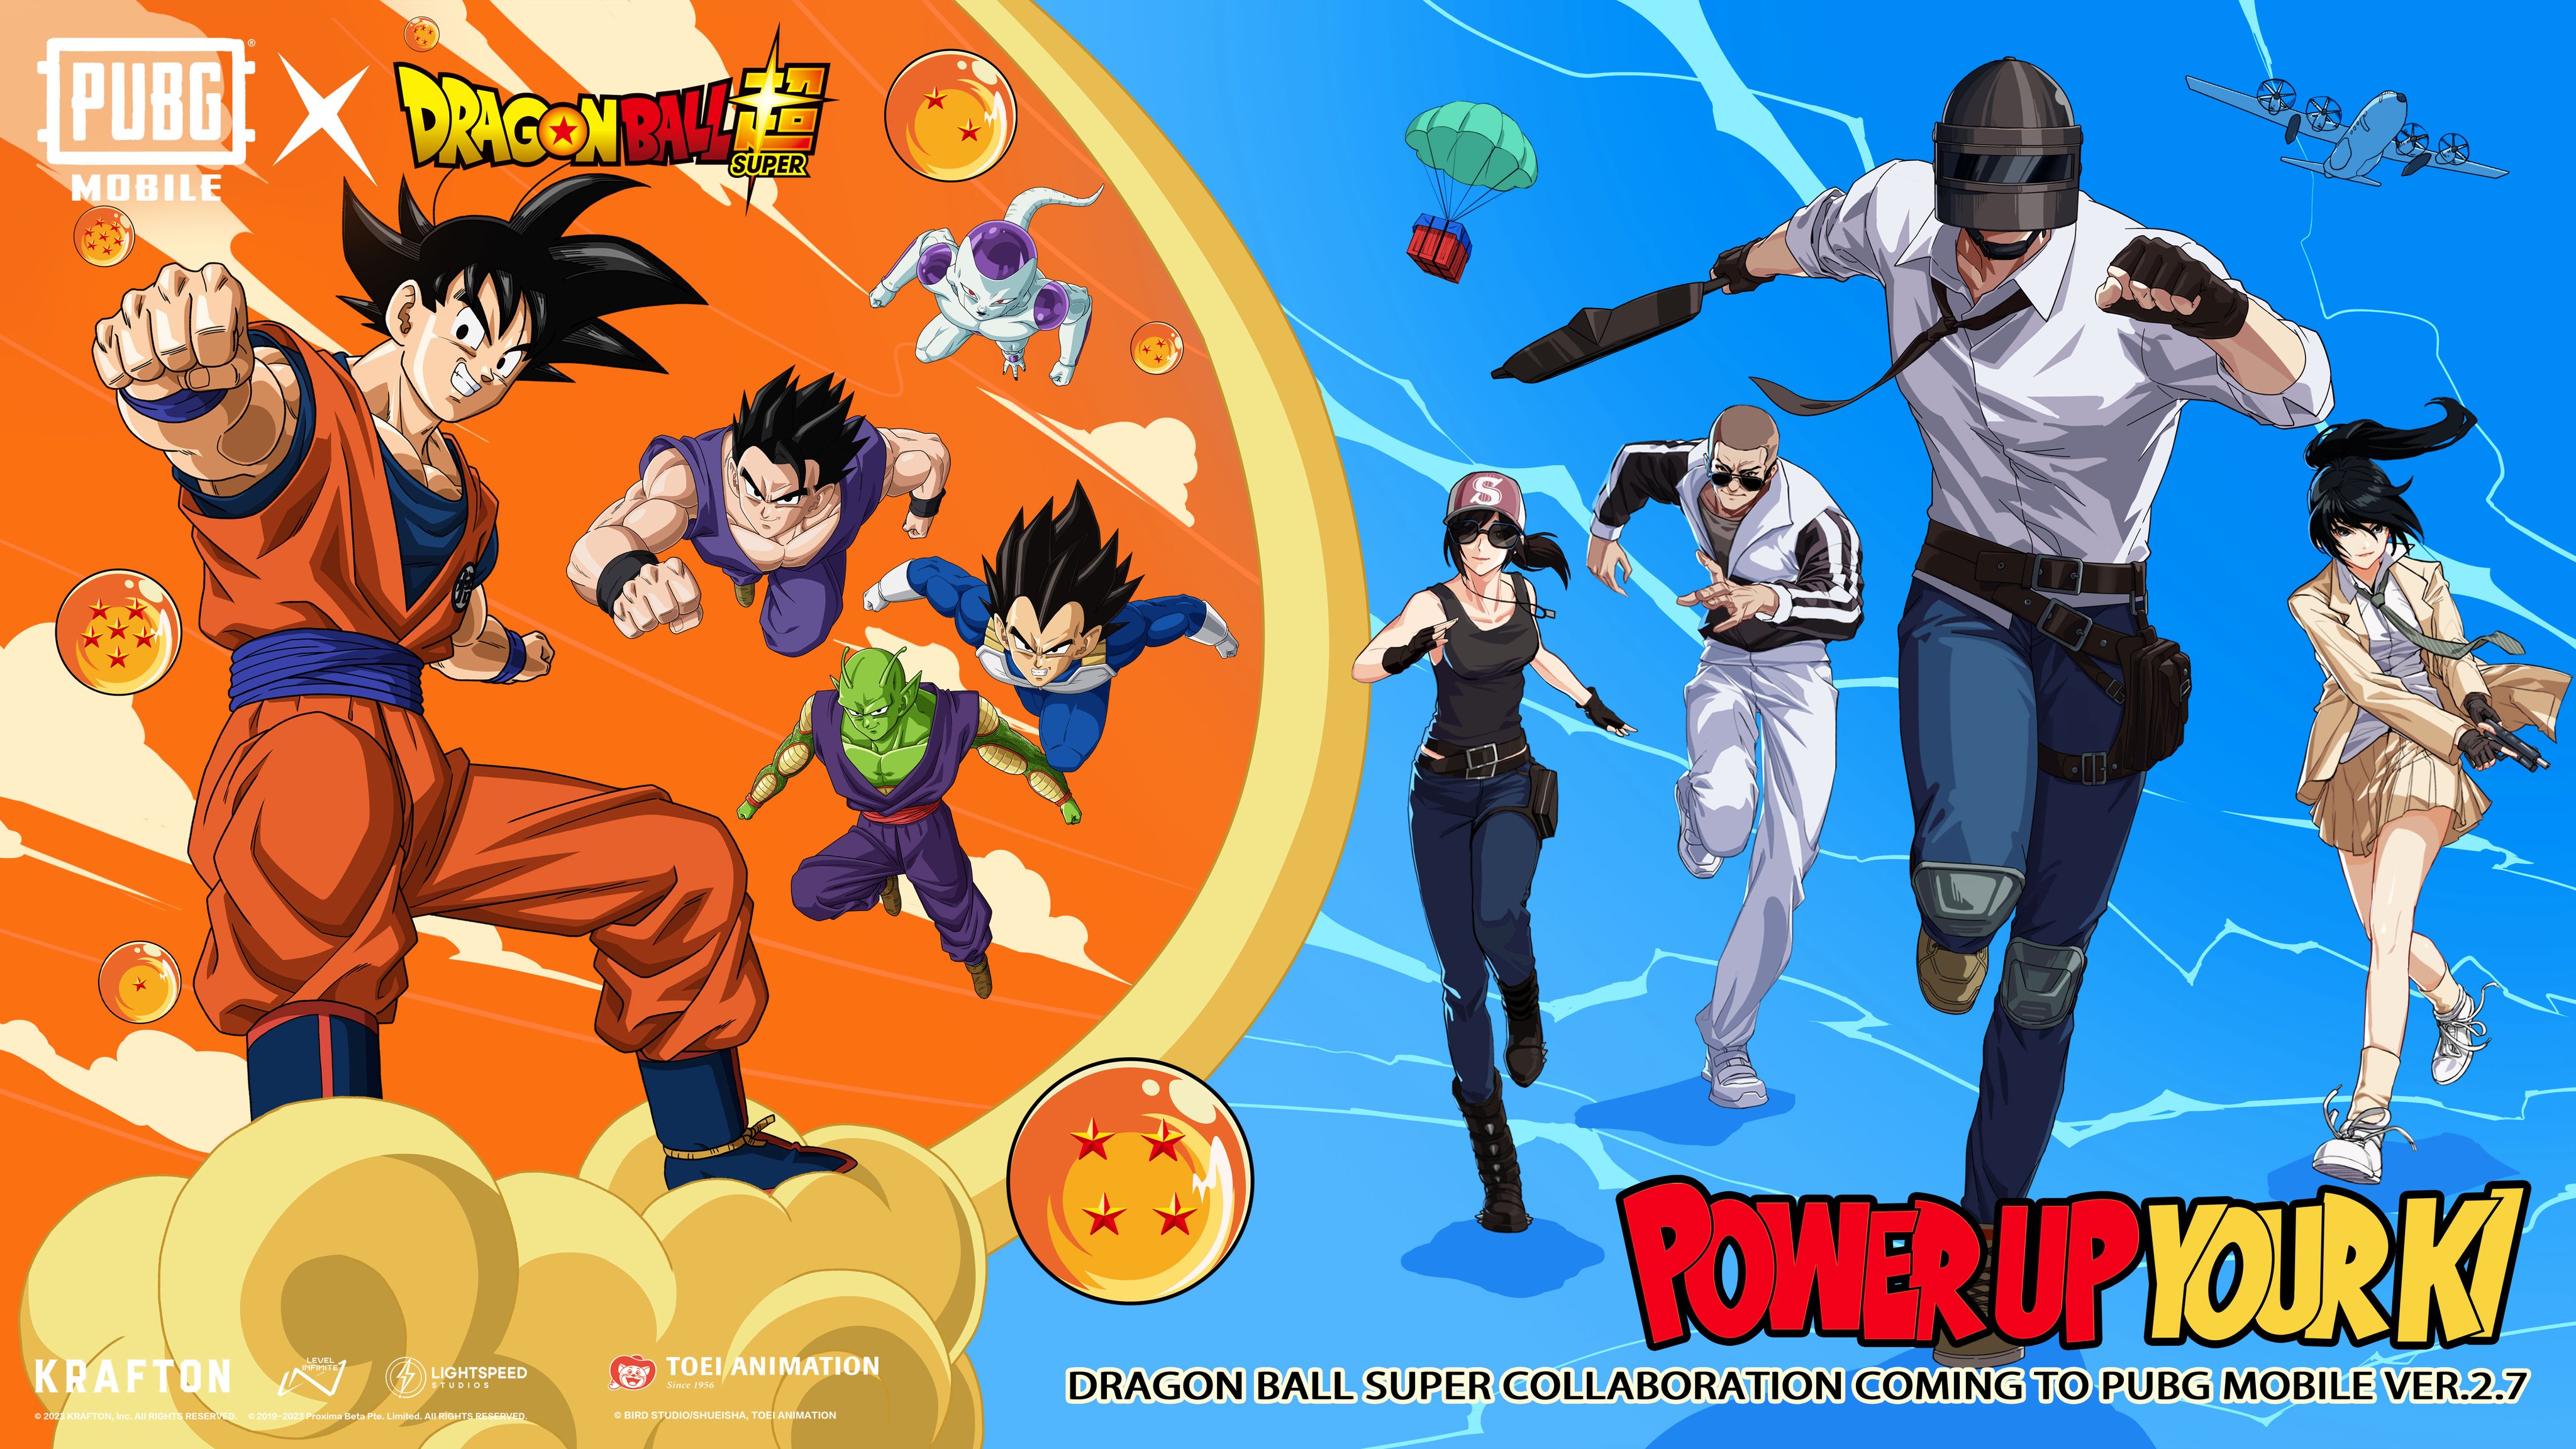 Pubg Mobile X Dragon Ball Super Collab Will Go Live On July 12